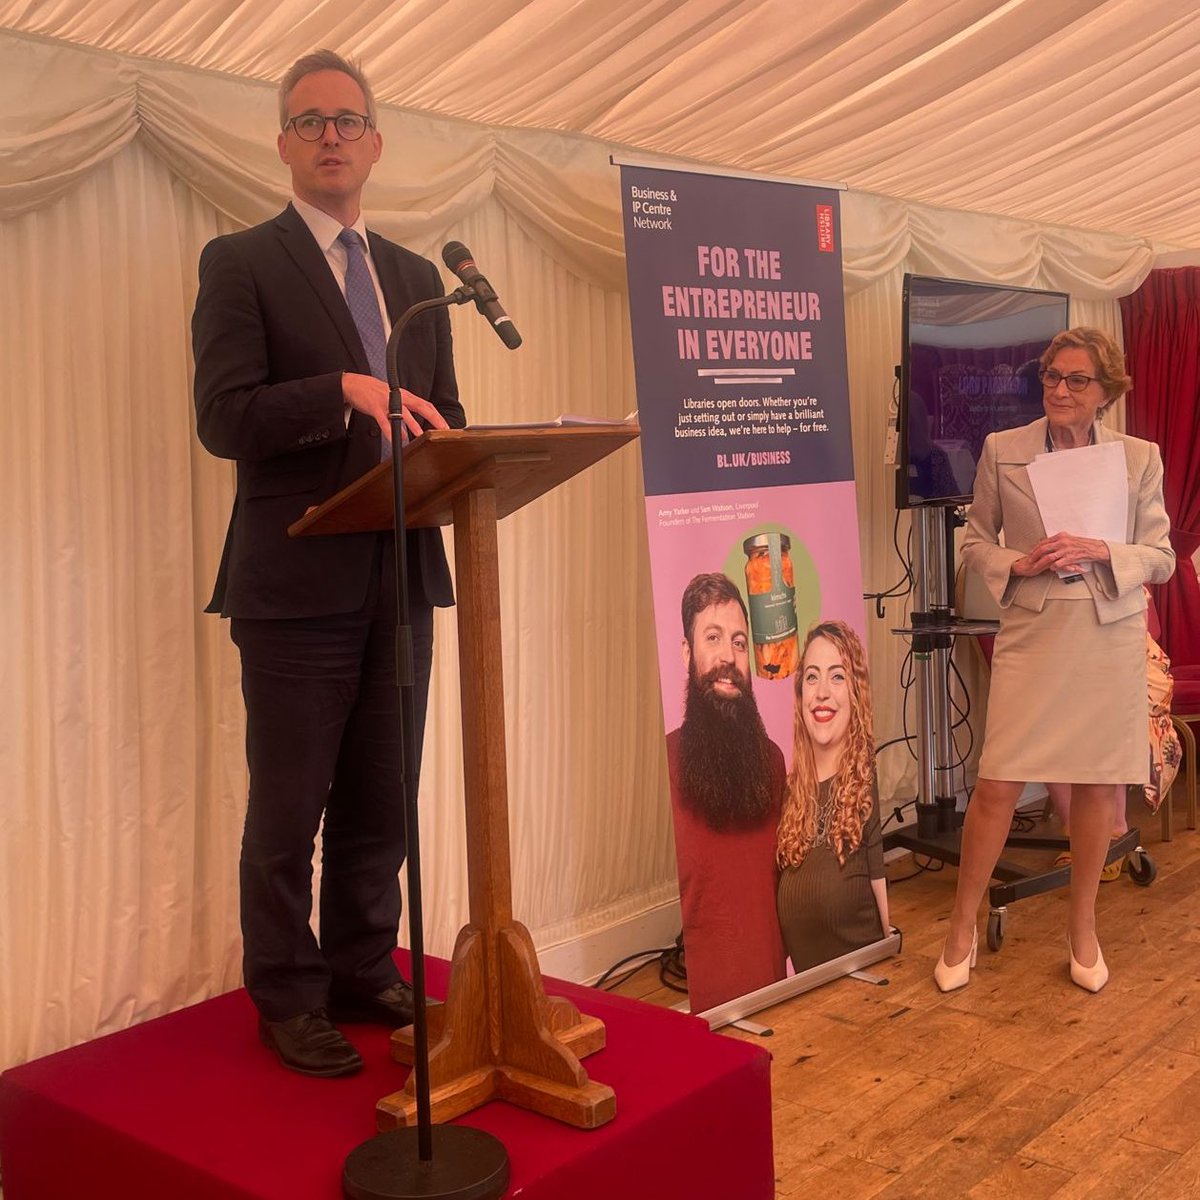 Backed by £13m from @DCMS, the @BritishLibrary’s network of Business & IP Centres have helped to create more than 18,000 new businesses📈 Lord Parkinson congratulated the entrepreneurs who’ve turned their ideas into thriving businesses @BIPC Read more: bl.uk/business-and-i…